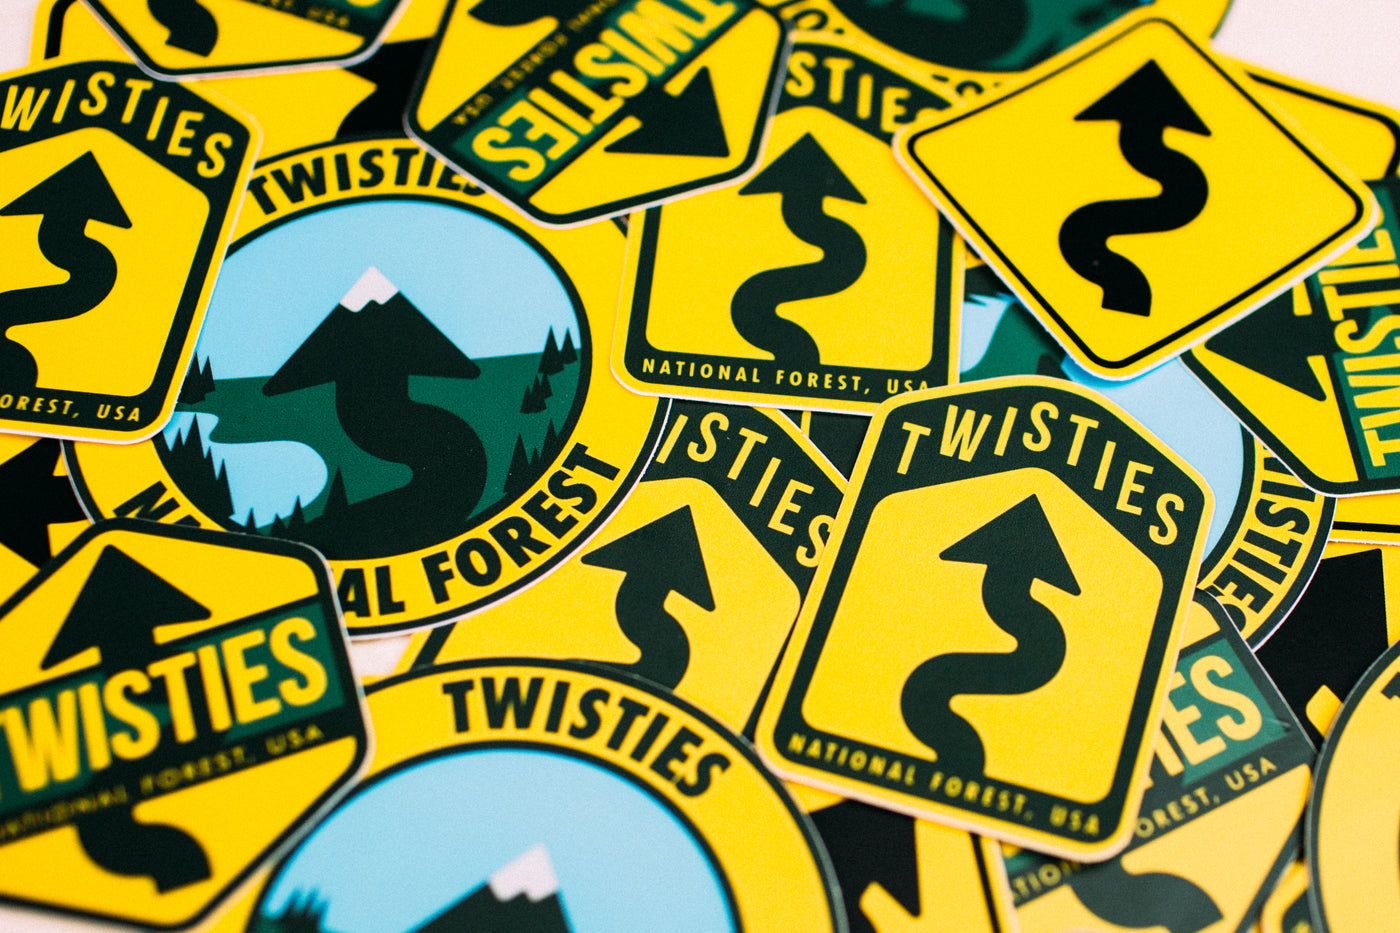 TWISTIES NATIONAL FOREST Decal Pack